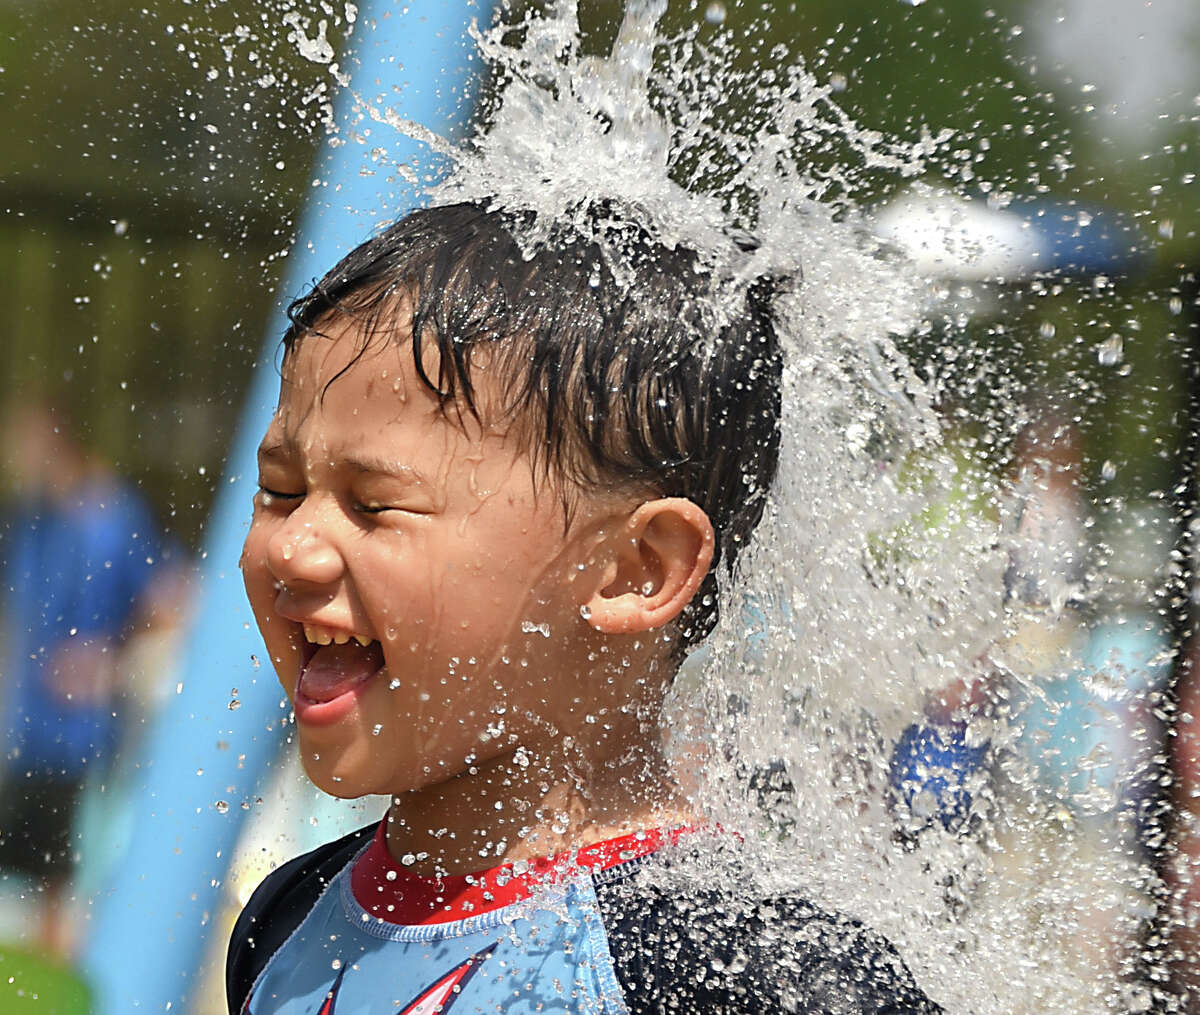 Ethan Reynante, 2, of Cohoes cools off in the new splash pad after a ribbon-cutting for the Town of Colonie's new water playground at the Colonie Mohawk River Park on Monday, July 16, 2018 in Cohoes, N.Y. (Lori Van Buren/Times Union)